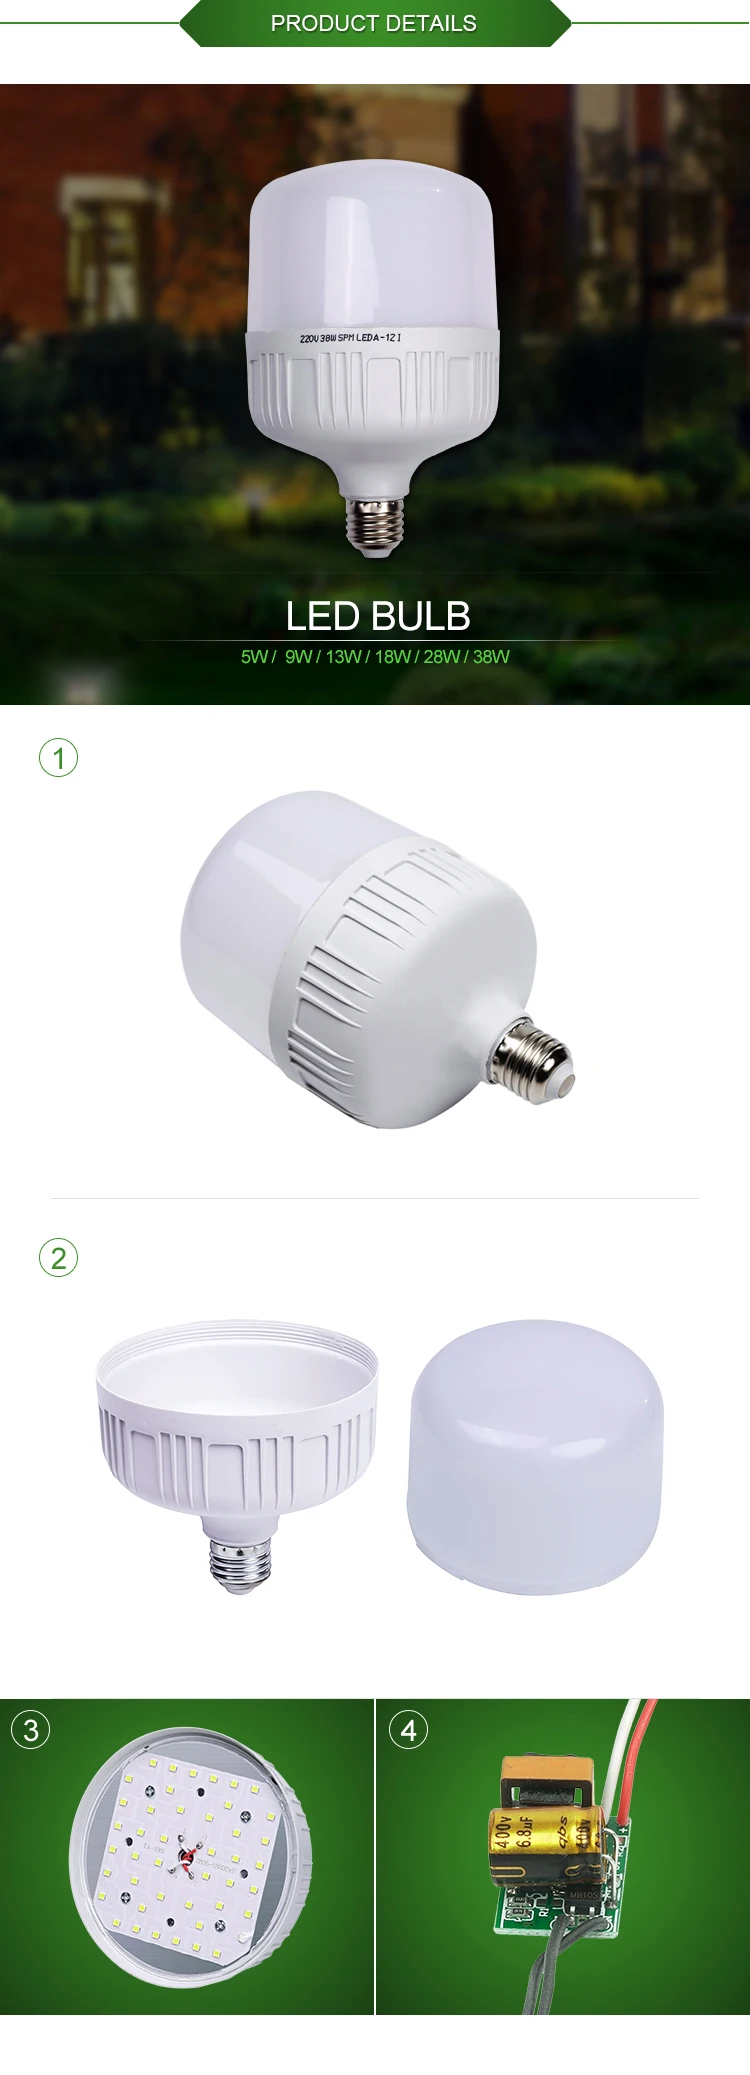 Wholesale led skd parts With High Popularity